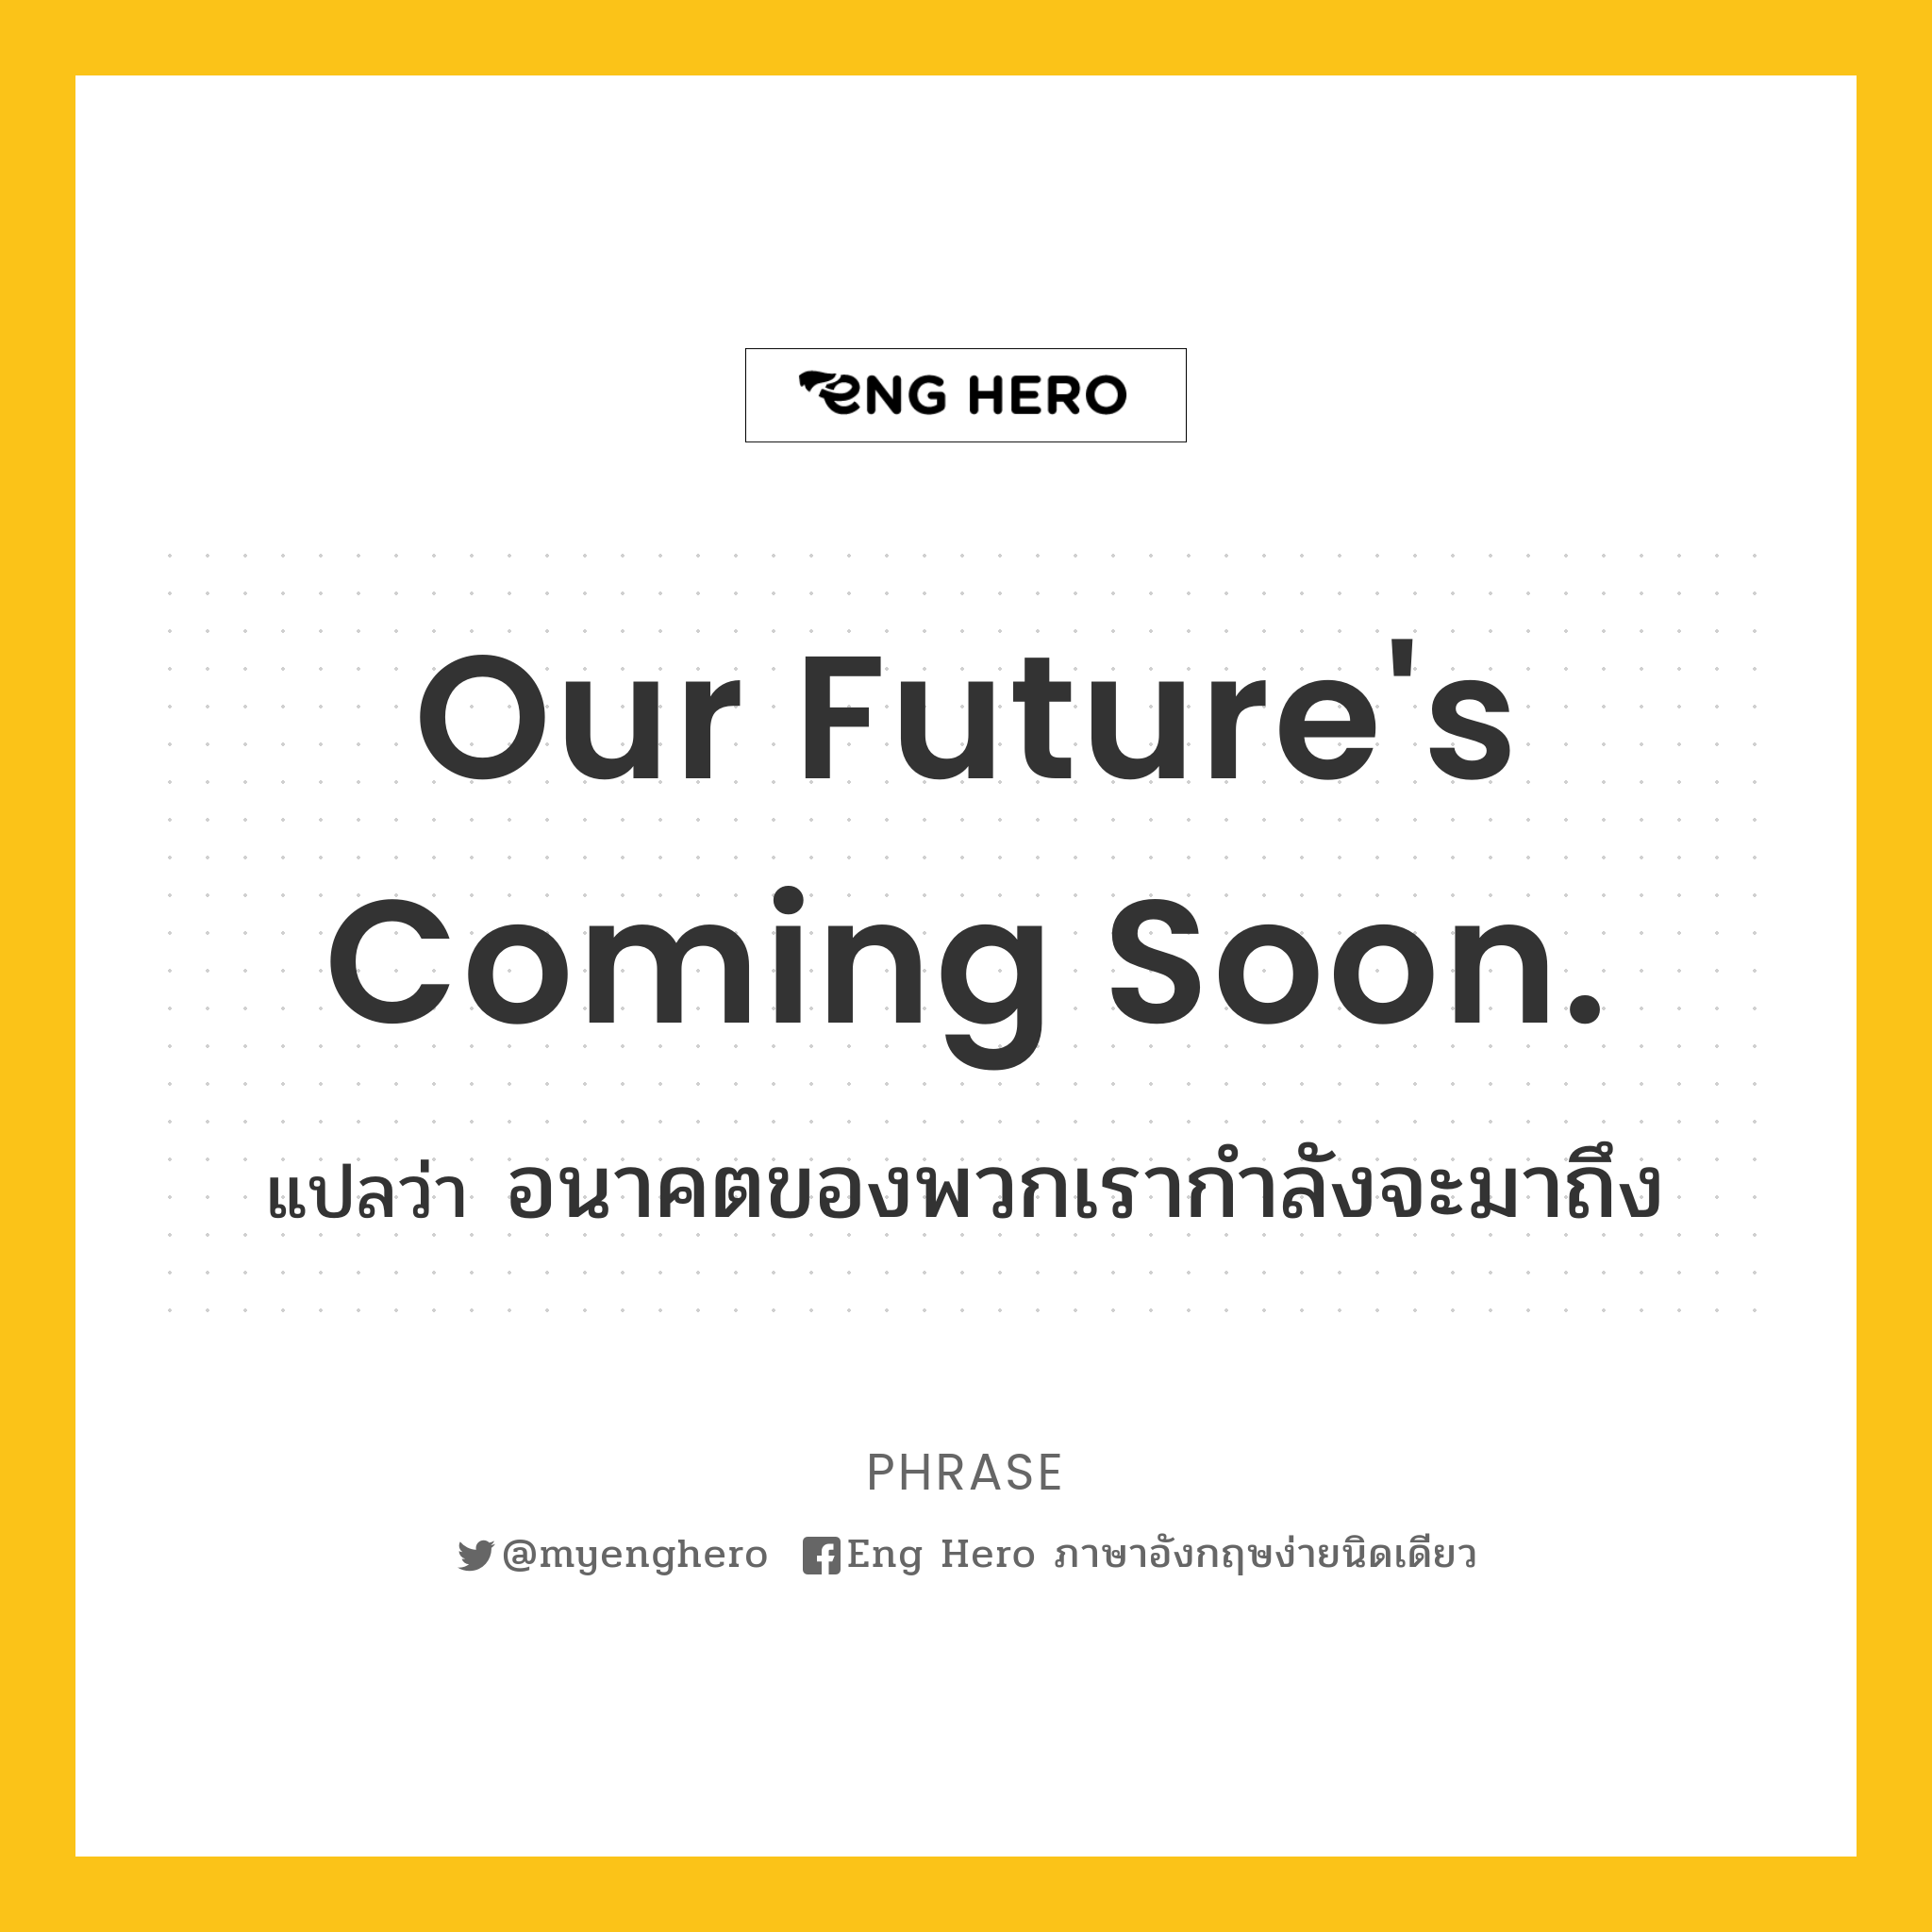 Our future's coming soon.